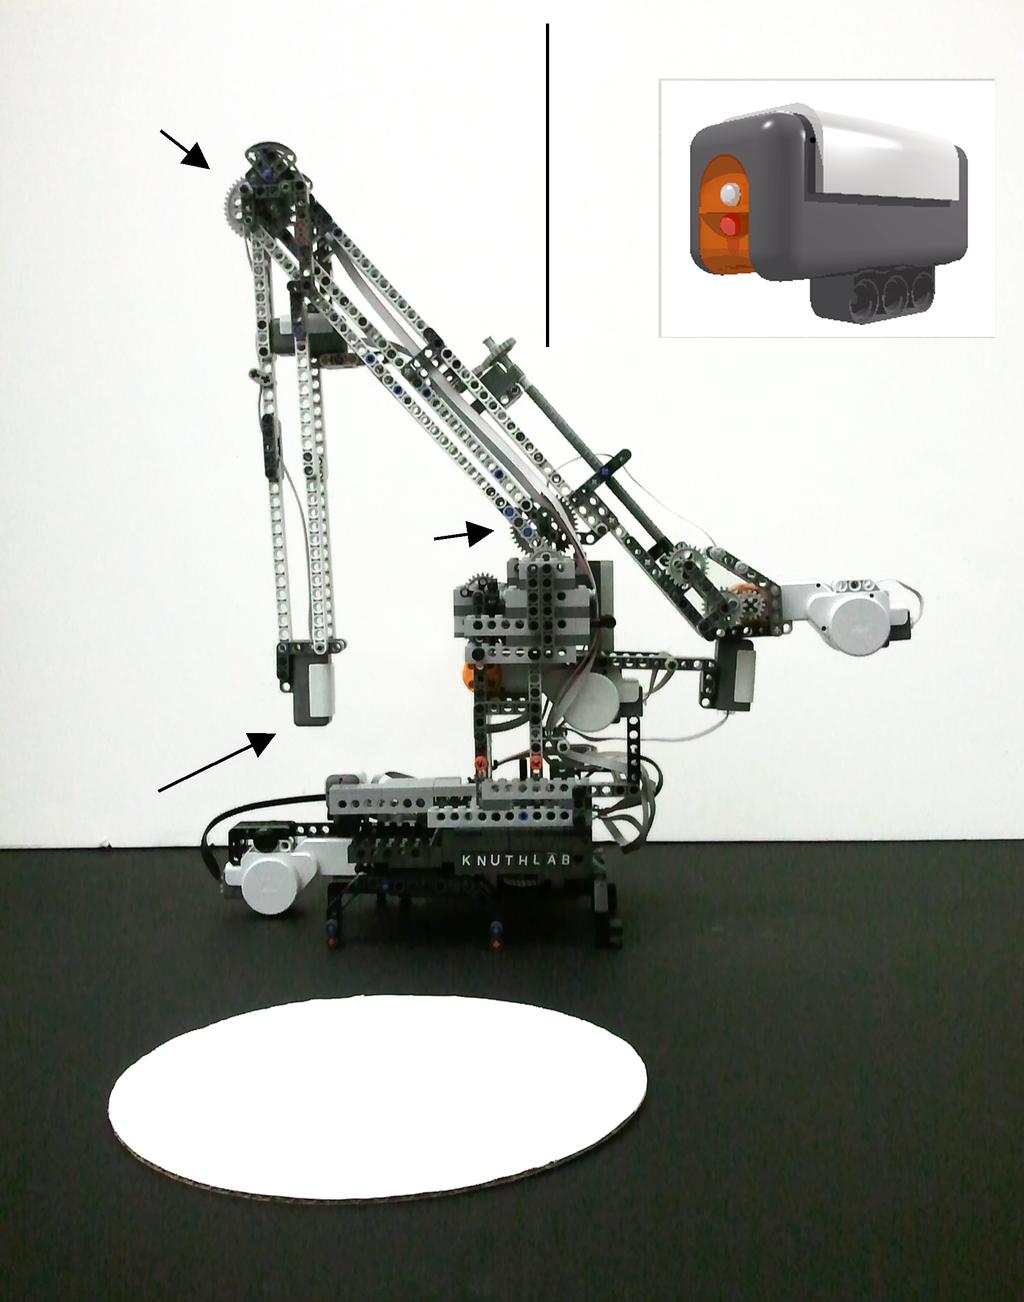 Figure 1: A photograph showing the robotic arm along with the circle it is programmed to characterize. The robotic arm is constructed using the LEGO NXT Mindstorms System.